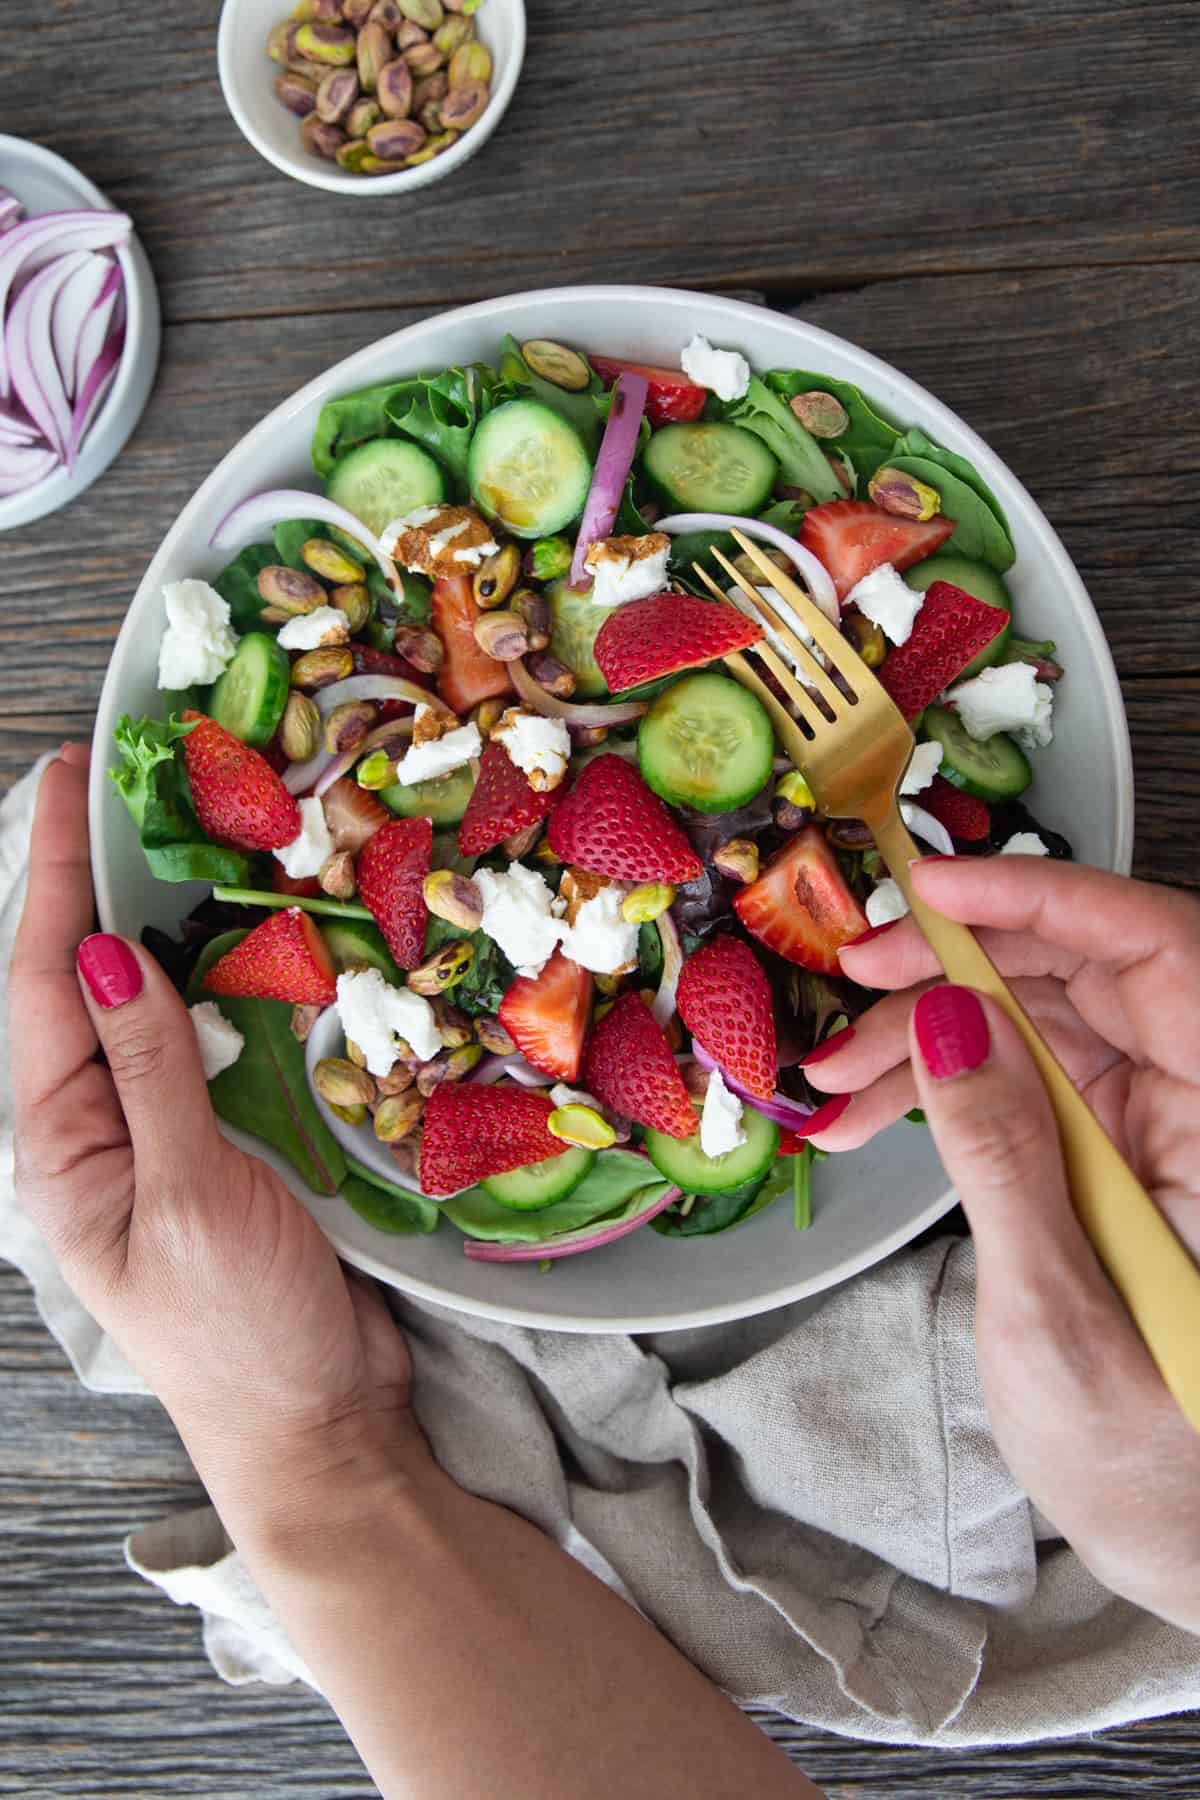 This strawberry salad with goat cheese and pistachios is ready in 10 minutes. It's packed with flavors and perfect for any occasion.
